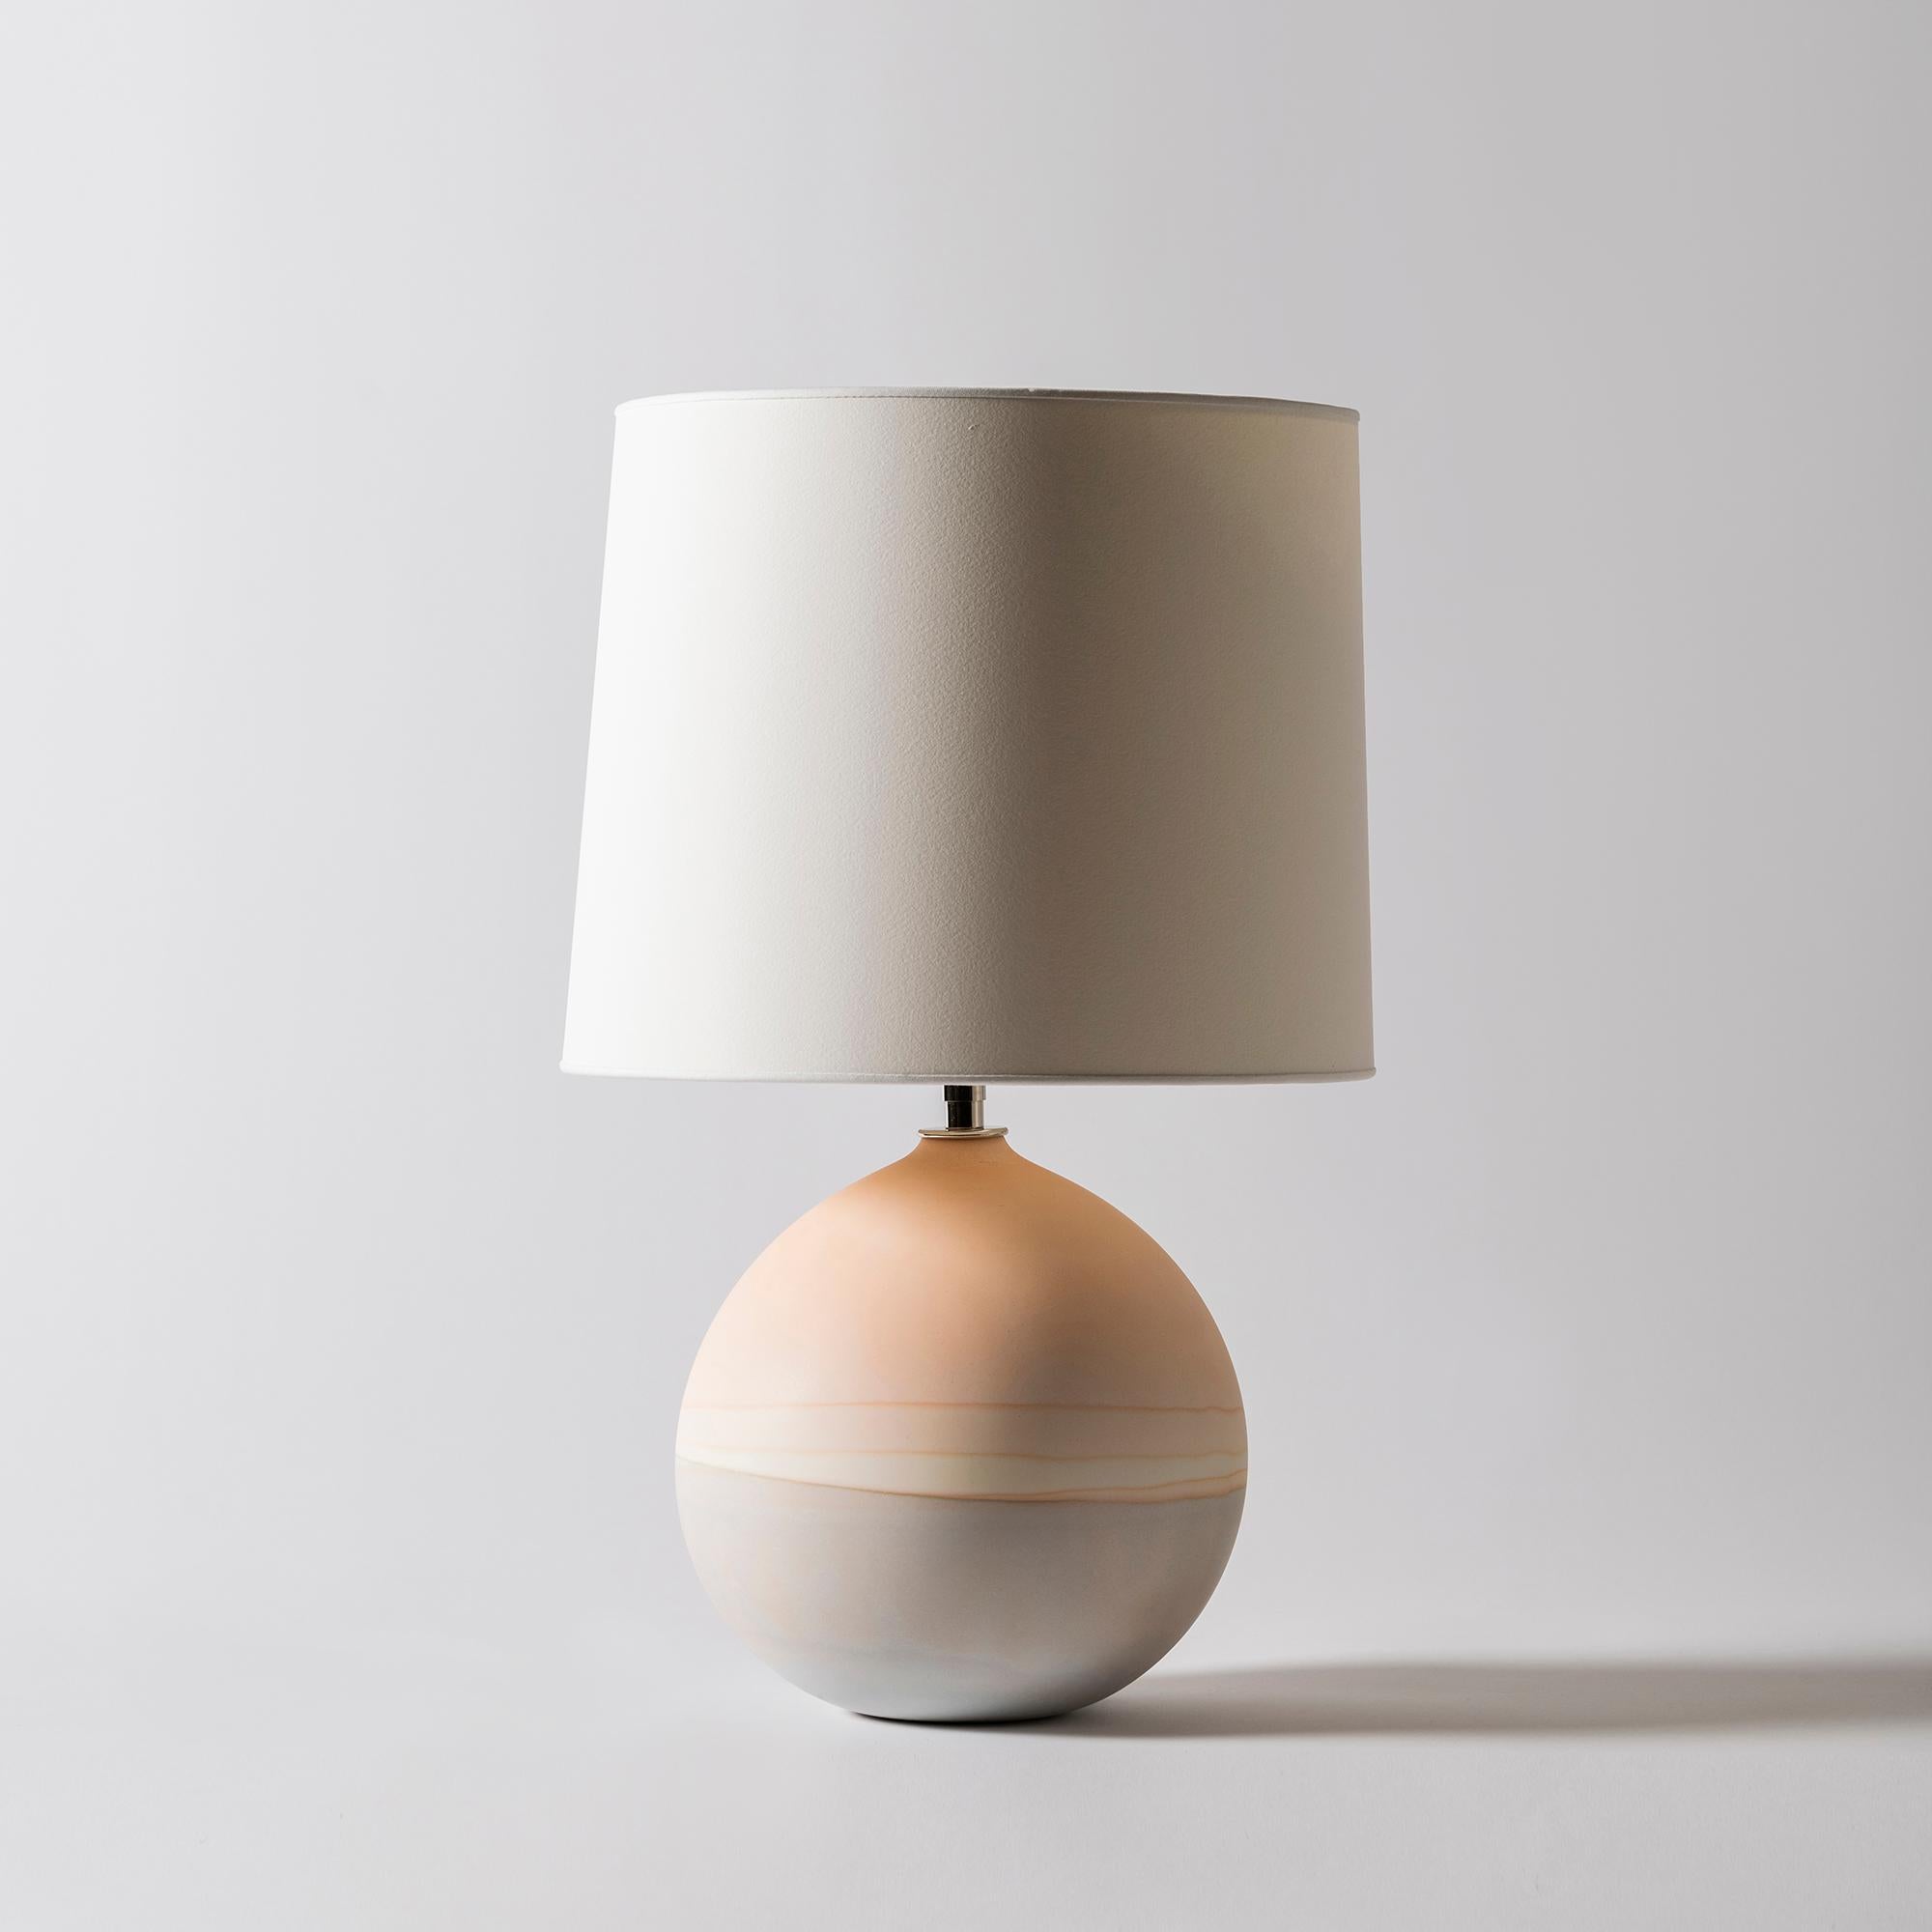 Saturn lamp in peach and sage by Elyse Graham
Dimensions: D 31 x H 49 cm
Materials: Plaster, Resin, Cotton rag Paper, brass, Nickel. Hardware: polished nickel-plated brass uno threaded socket
with turn key switch, in-line dimmer.
Molded, dyed,